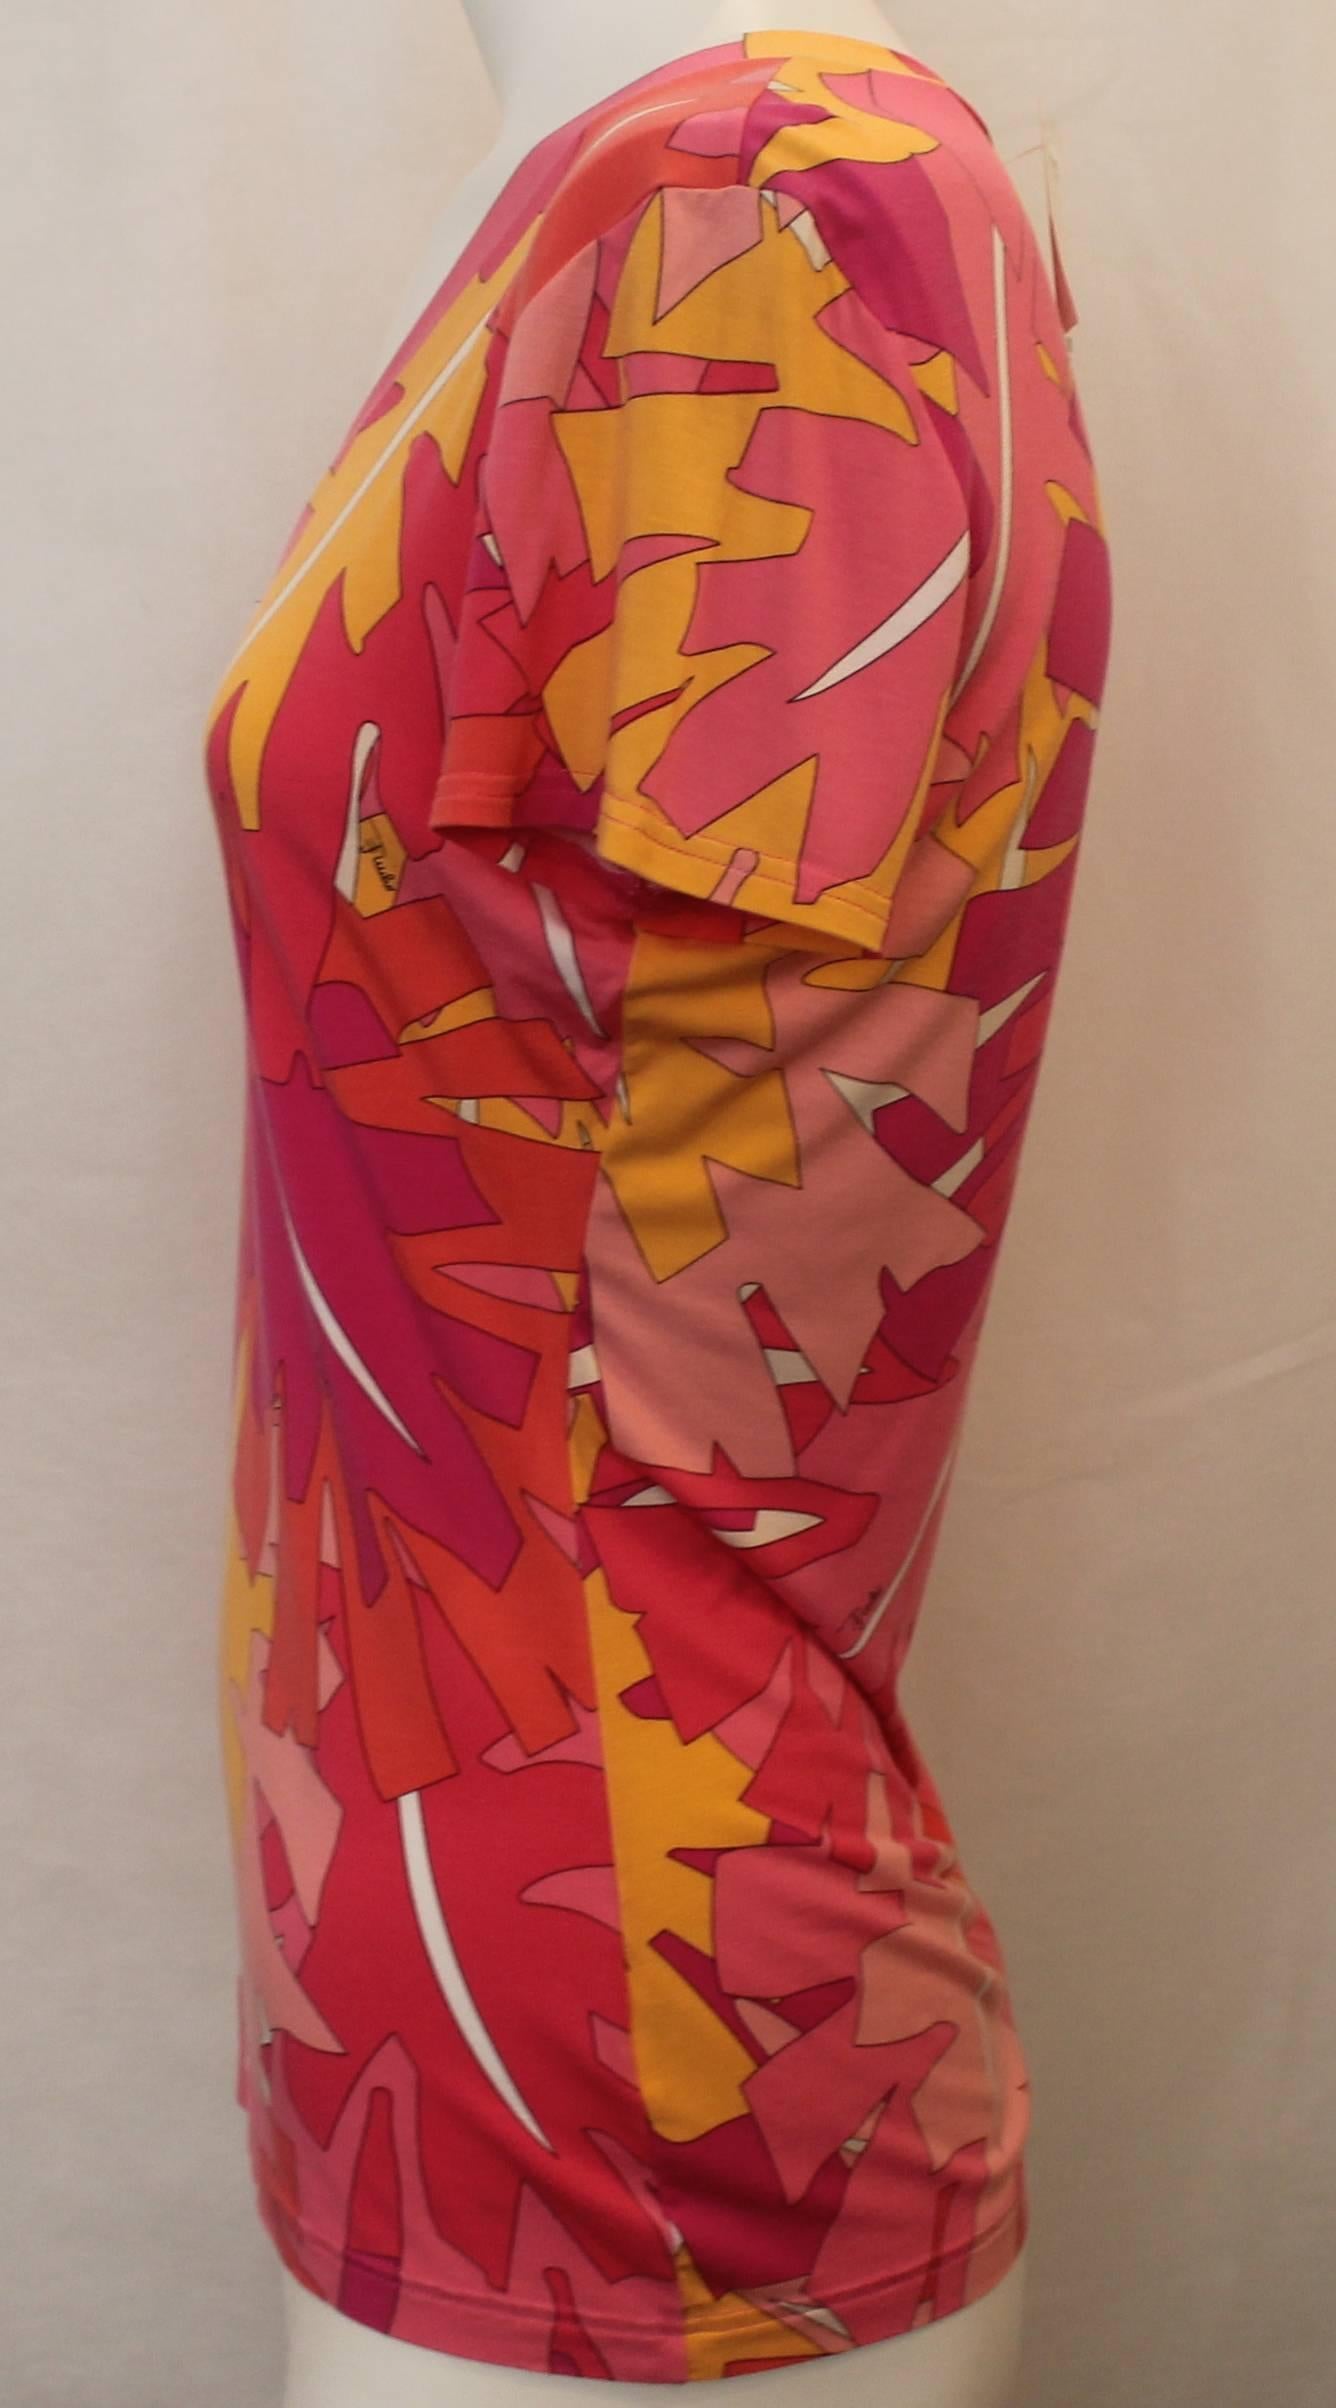 Red Emilio Pucci Pink and Orange Printed Synthetic Blend Short Sleeve V-Neck Top - L